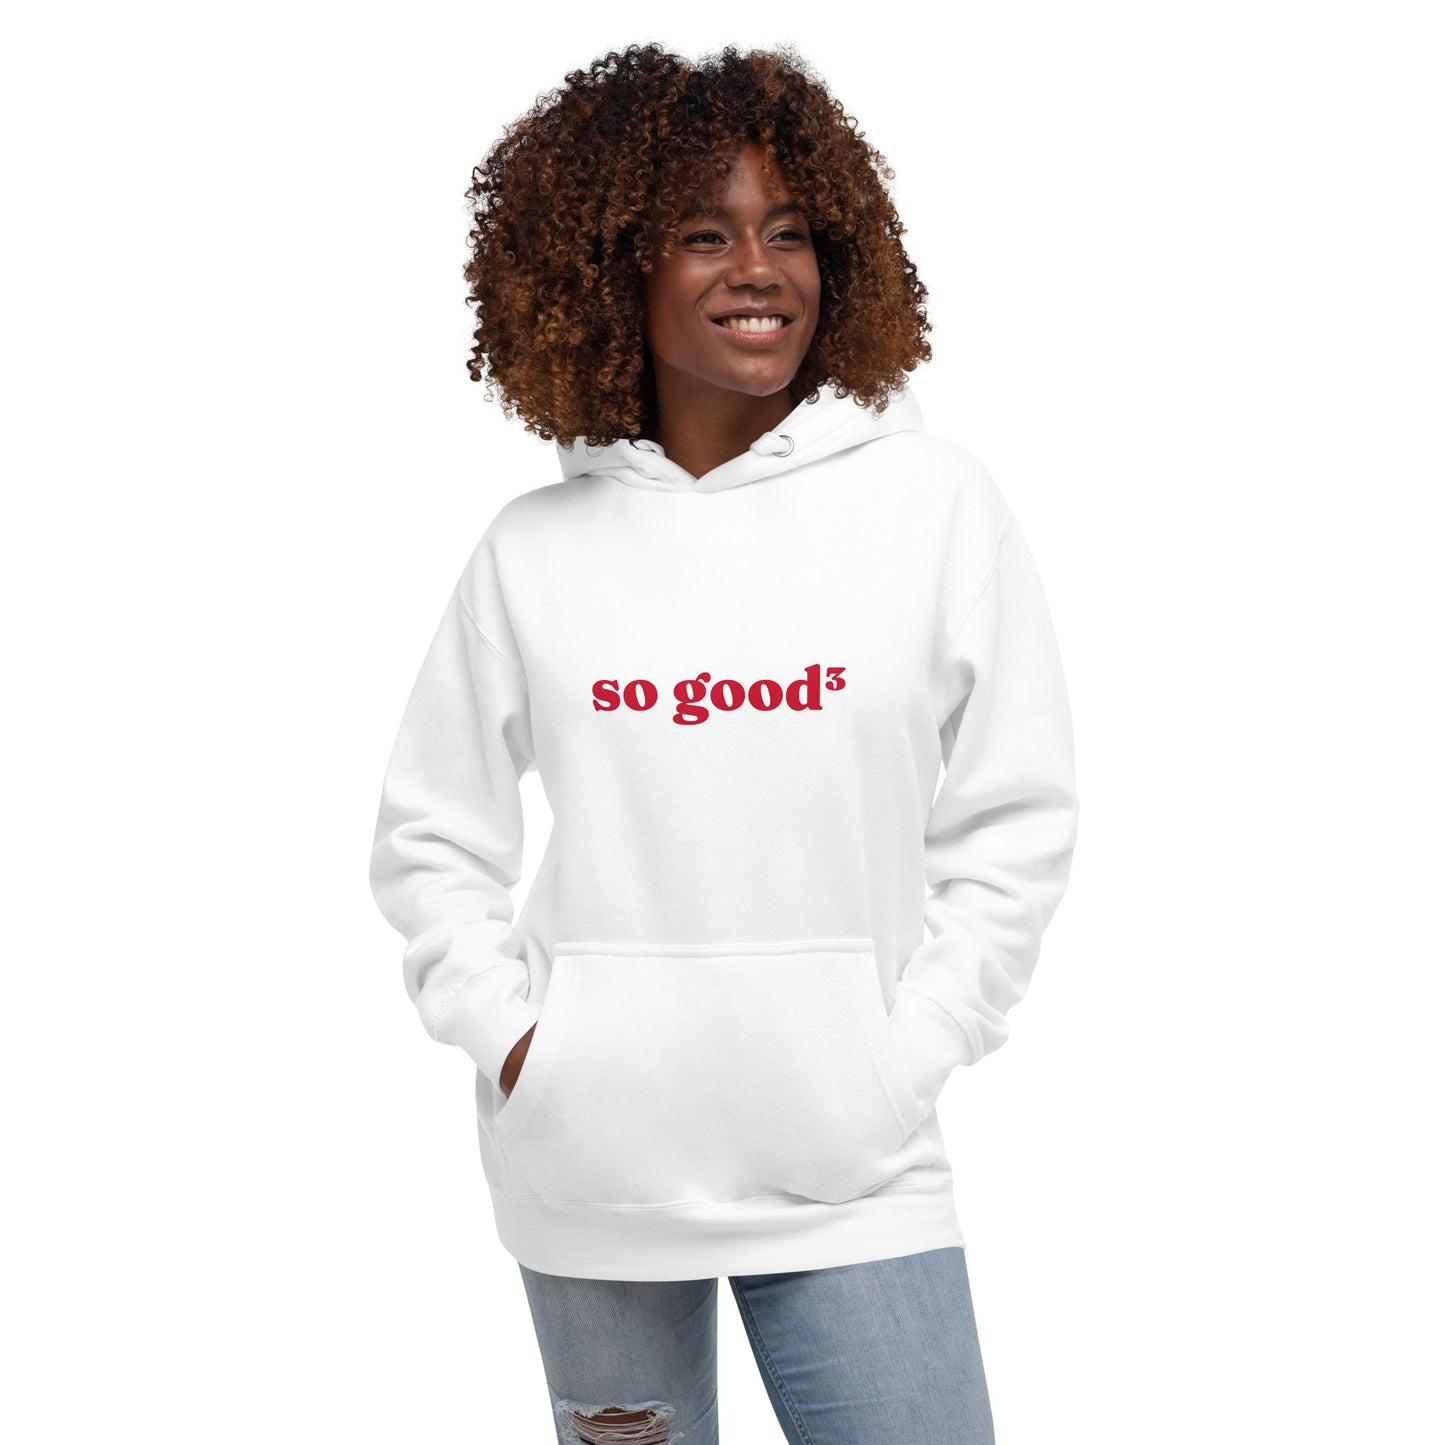 woman wearing white hoodie that says "so good cubed" in red lettering